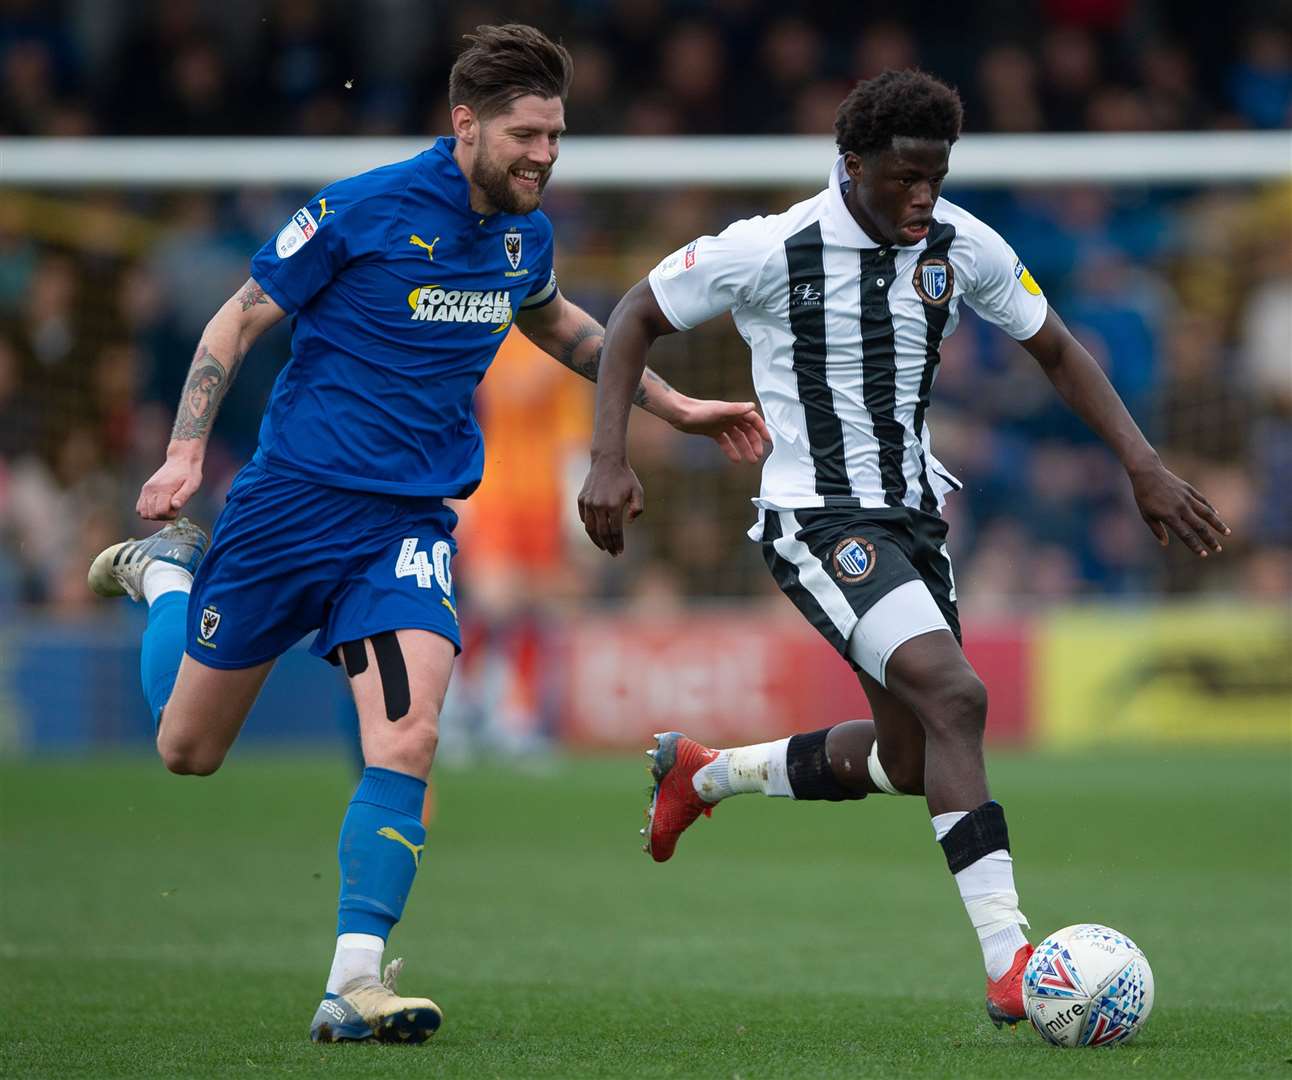 Gills midfielder Leo Da Silva Lopes gets away from Anthony Wordsworth Picture: Ady Kerry